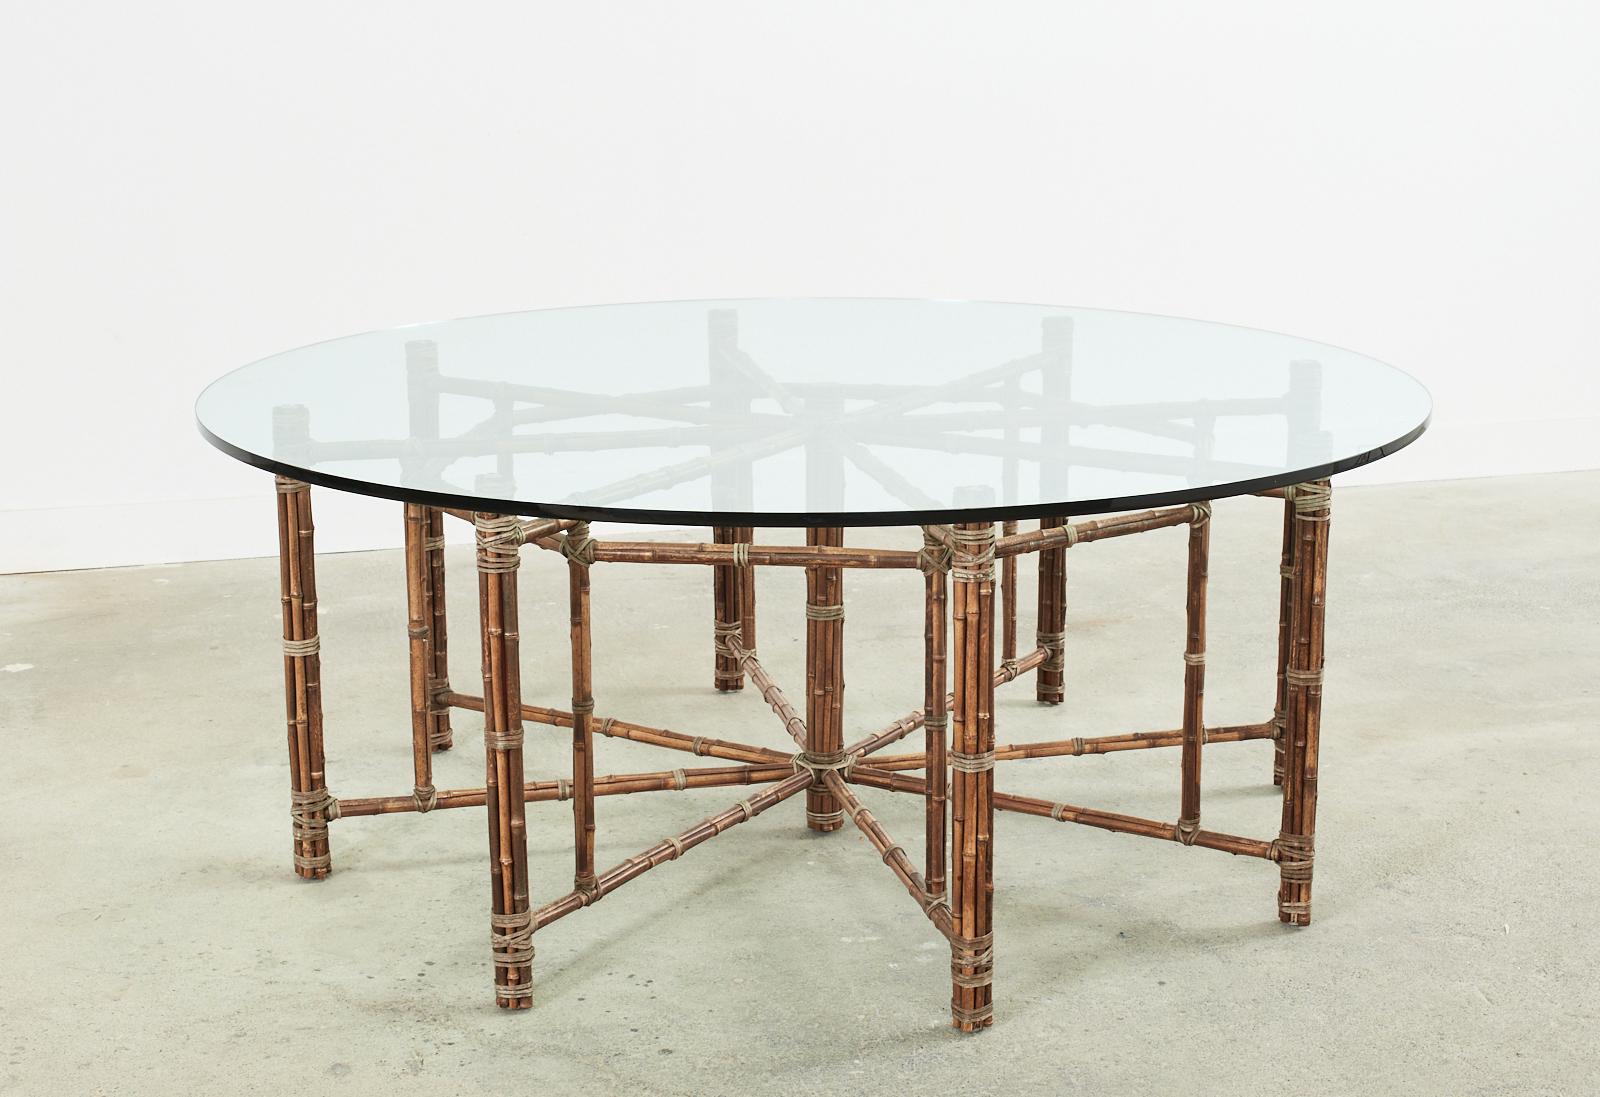 Gorgeous genuine McGuire organic modern bamboo rattan dining table featuring an octagonal base with seating for eight. This is an authentic McGuire table with an iron frame painted Golden Gate orange for authenticity, not a cheap reproduction. The